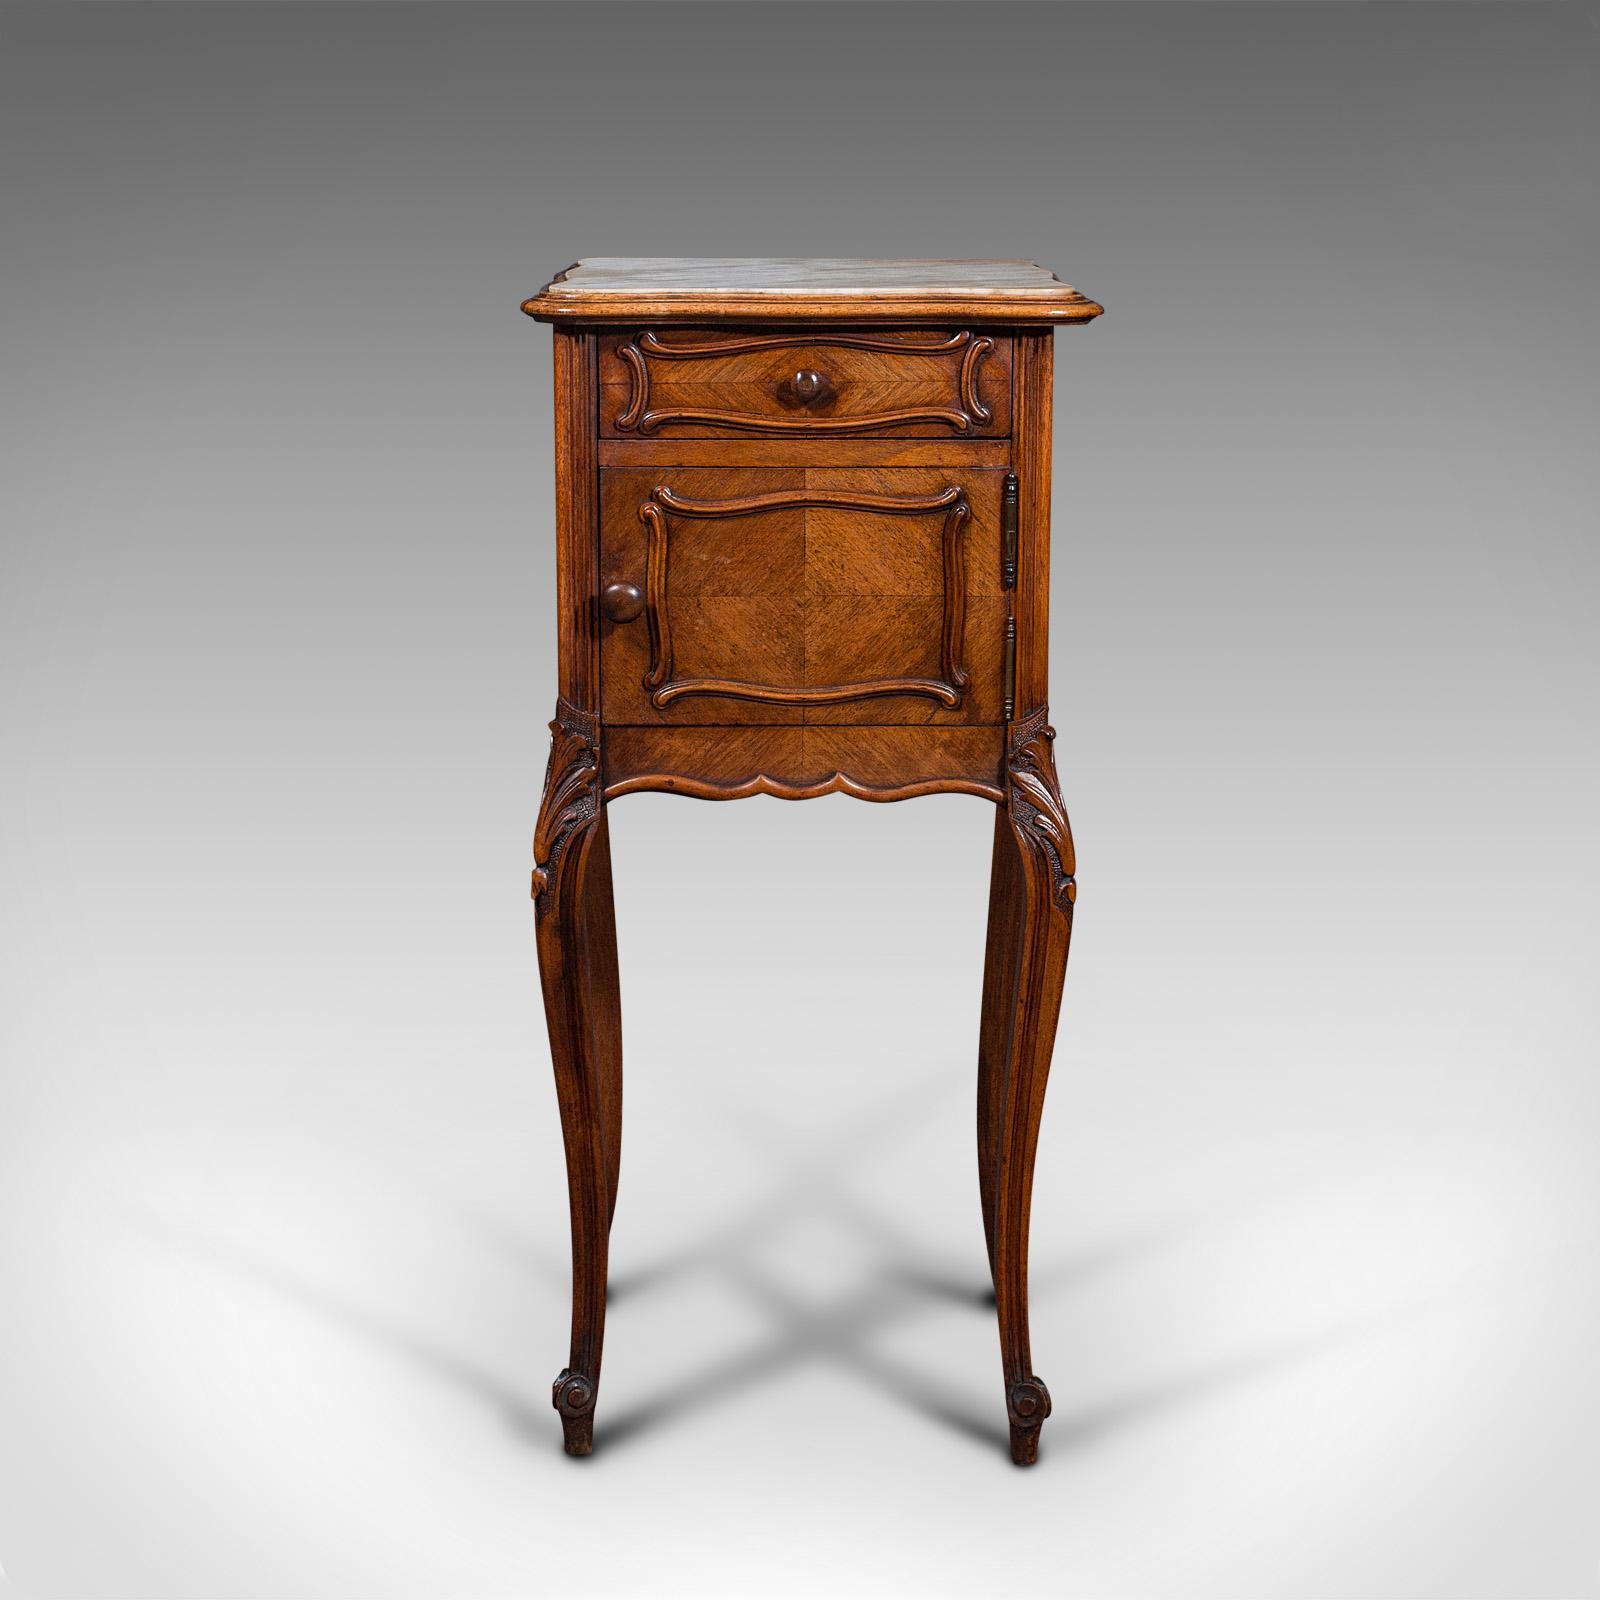 This is an antique bedside cabinet. A French, walnut and marble night stand, dating to the Victorian period, circa 1900.

Beautifully presented with appealing, tactile top
Displays a desirable aged patina throughout
Select walnut presents rich